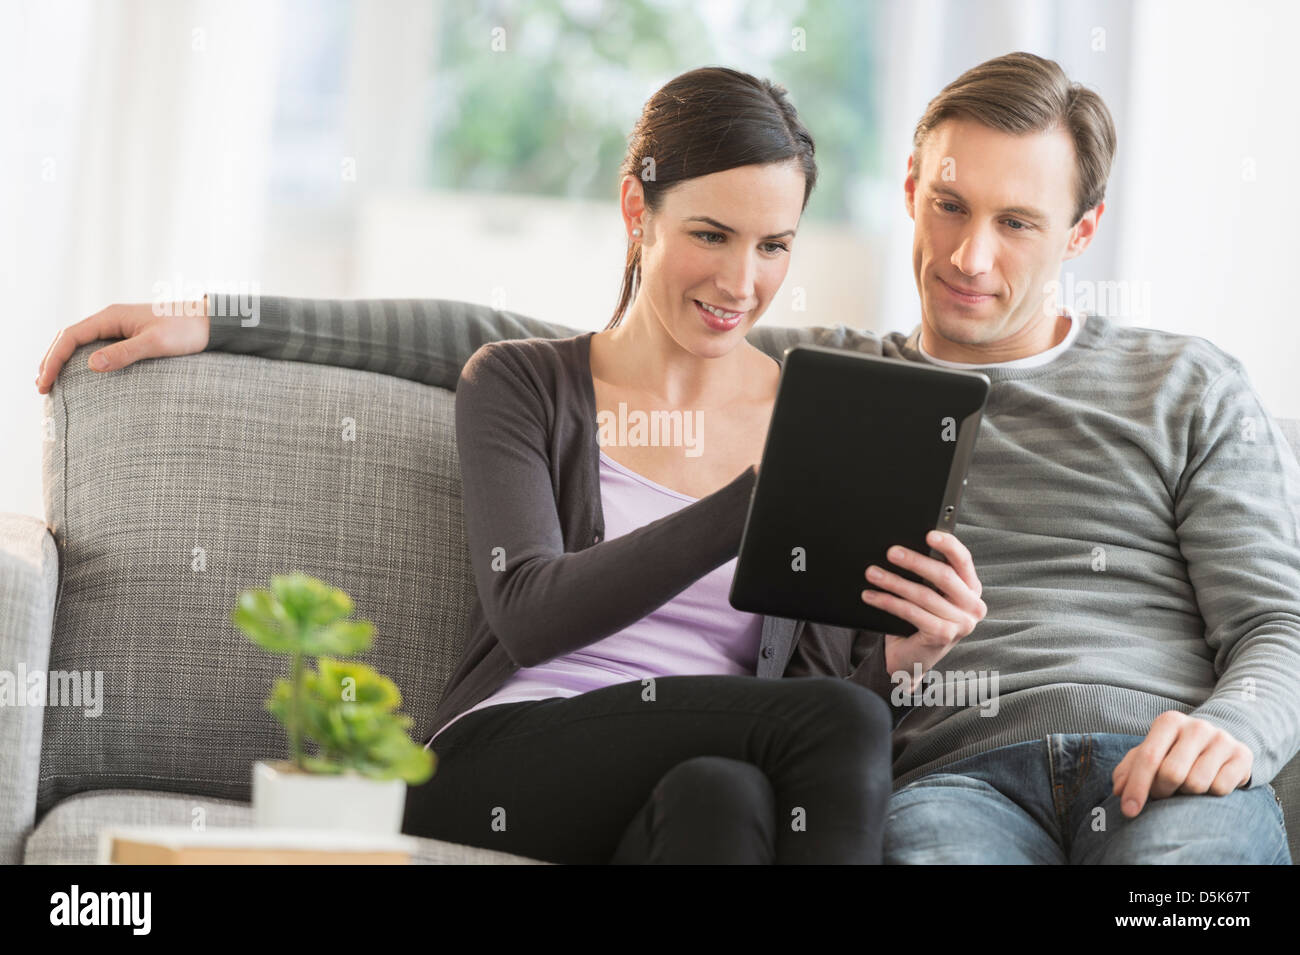 Couple using tablet pc Stock Photo